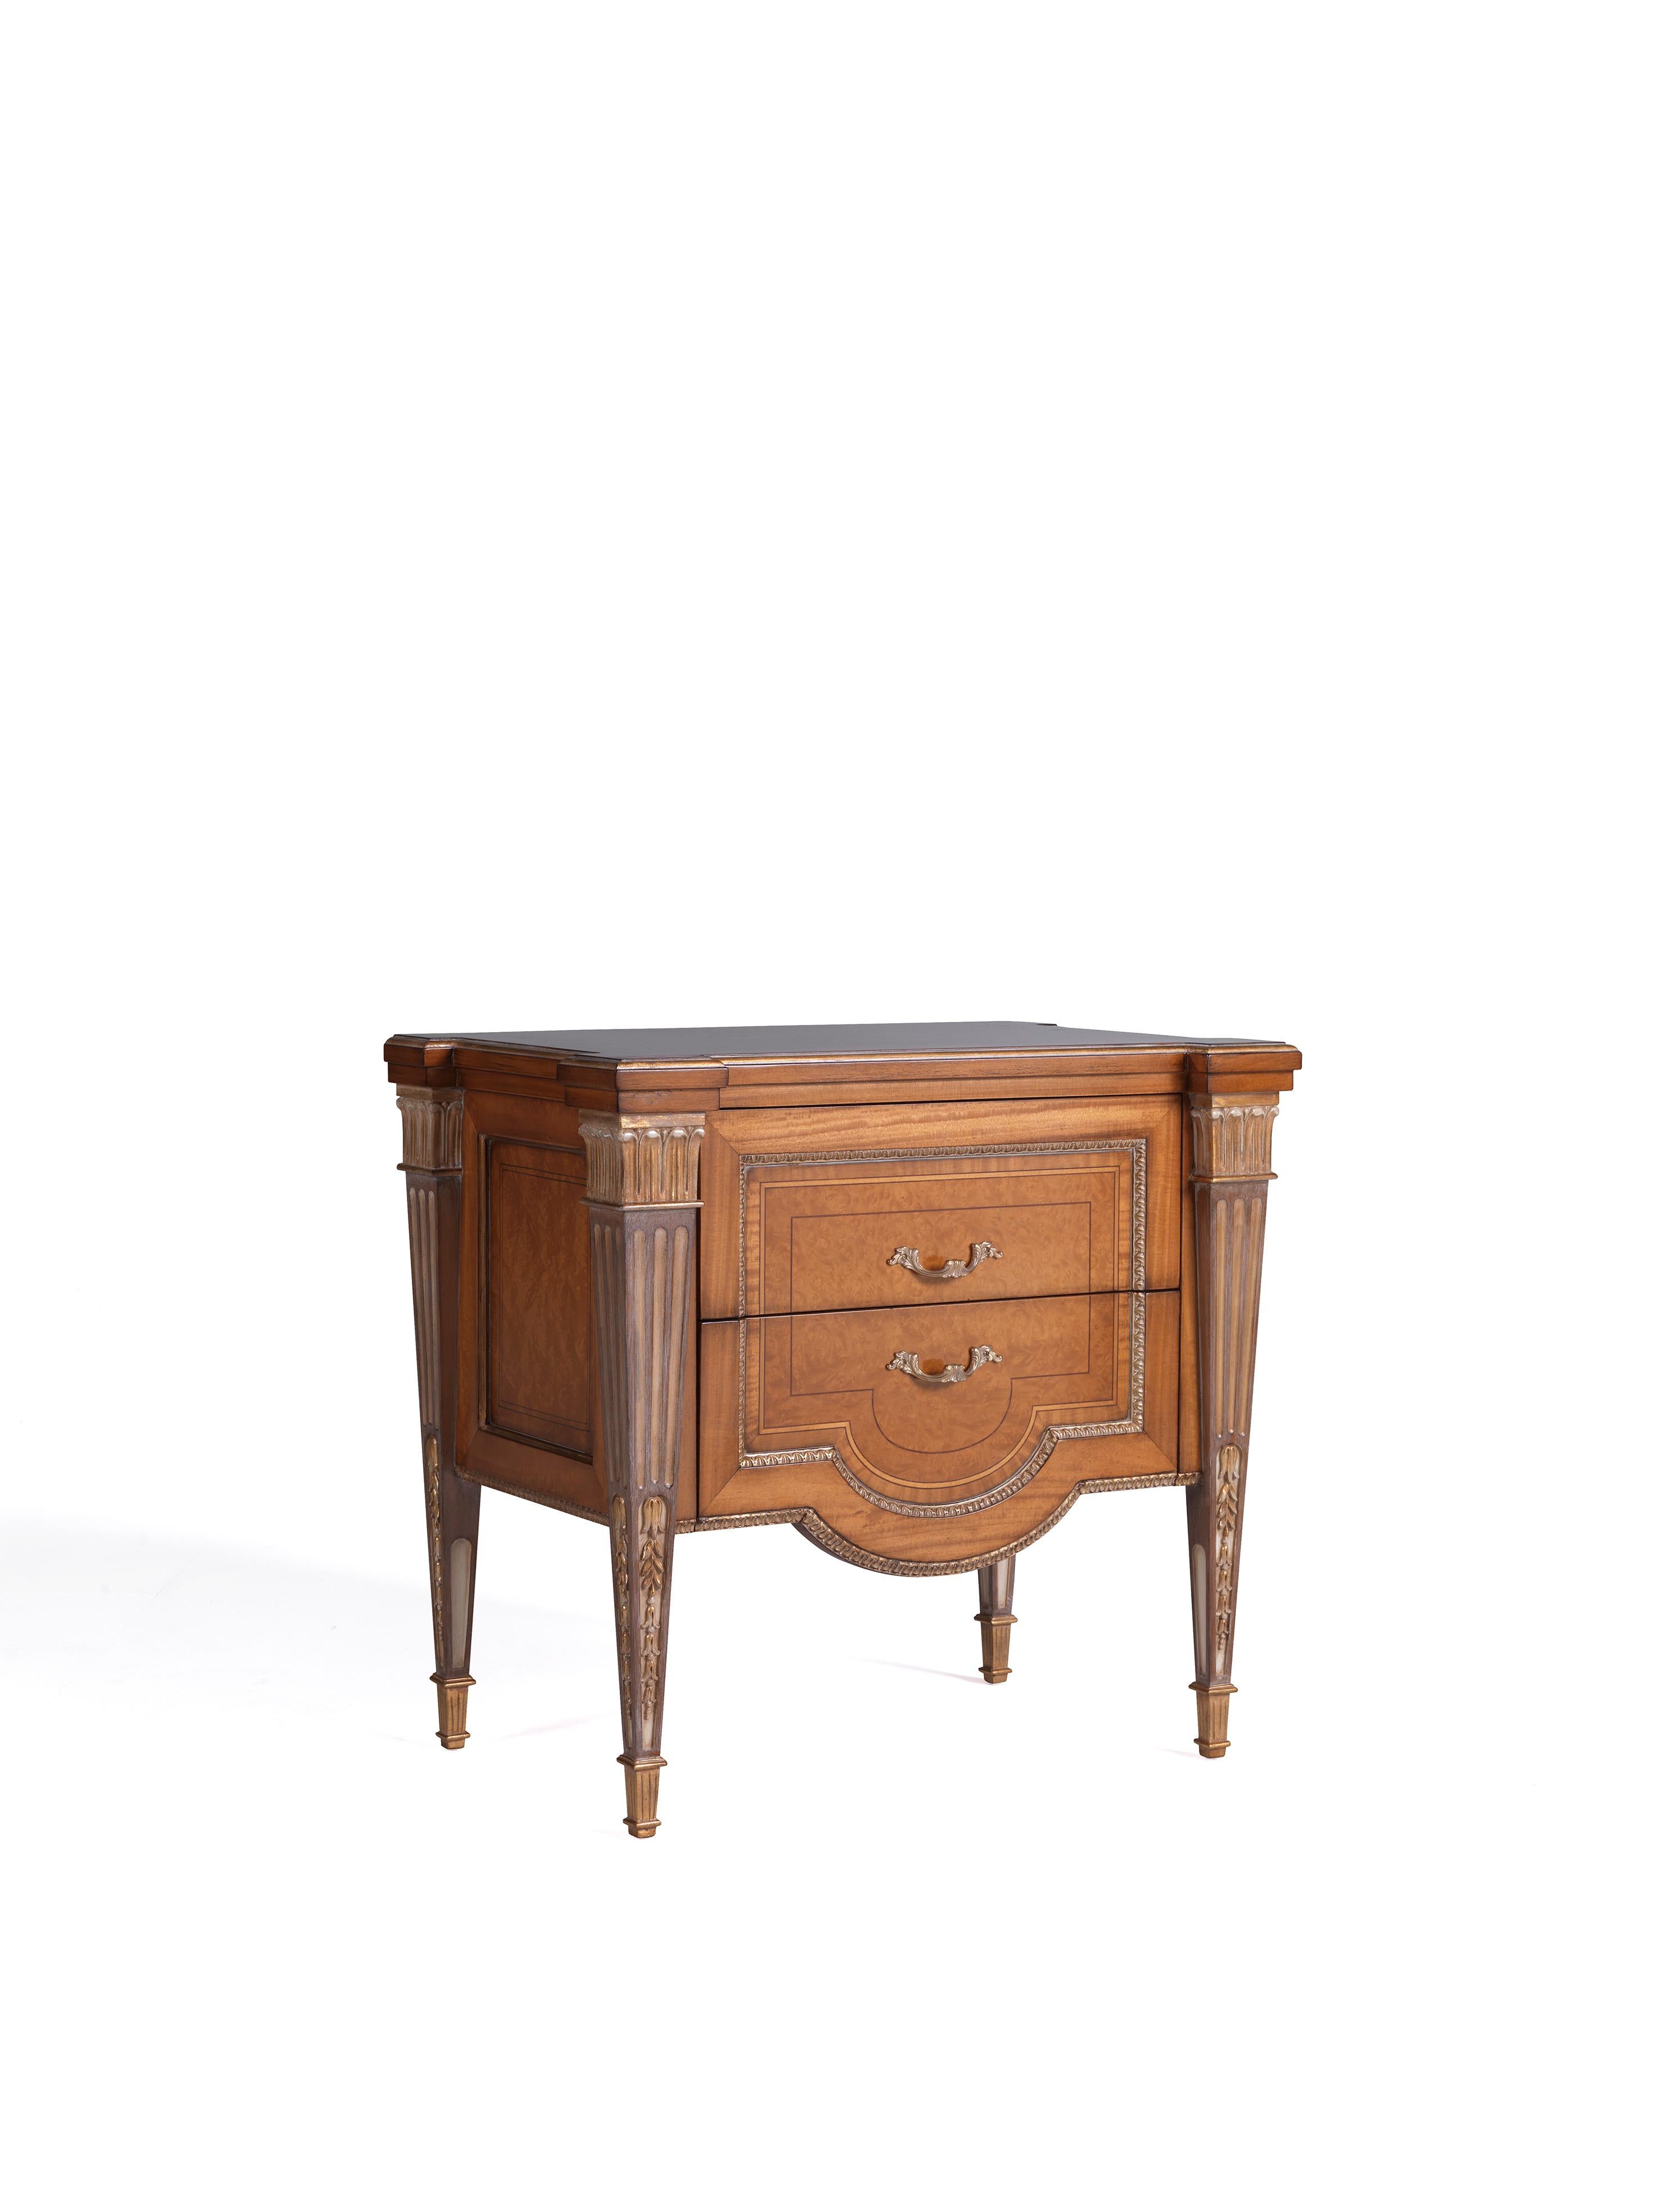 W048/NT night table is one of the latest Classic designs, part of the new Classic collection by Zanaboni. This Classic nightstand presents top notch and exclusive finishes as the citronnier and the myrtle briarwood, finely and elegantly inlid by